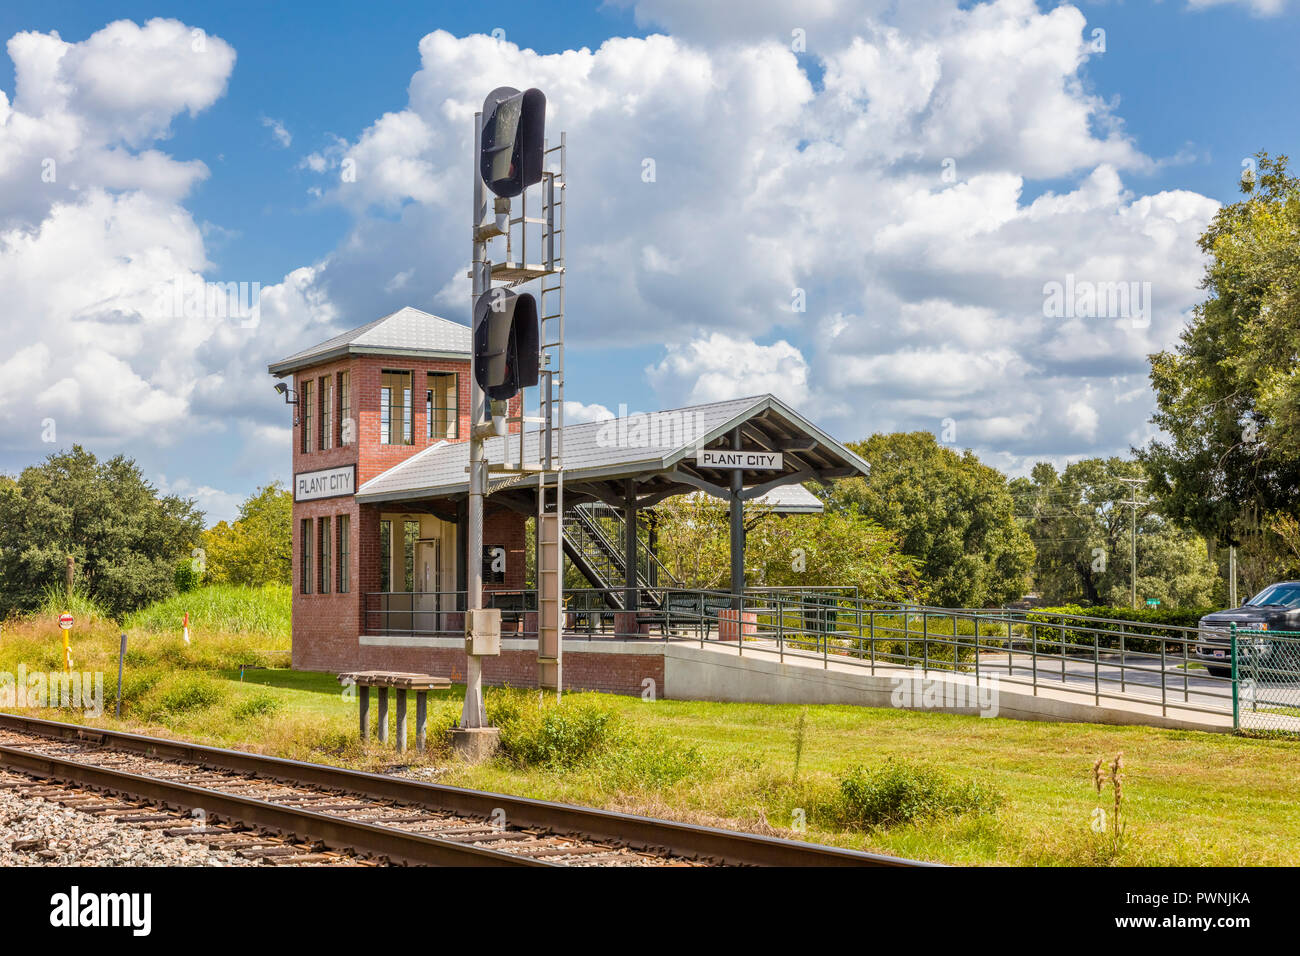 Train Veiwing Platform and railroad tracks at Union Station Depot in Plant City Florida in the United States Stock Photo